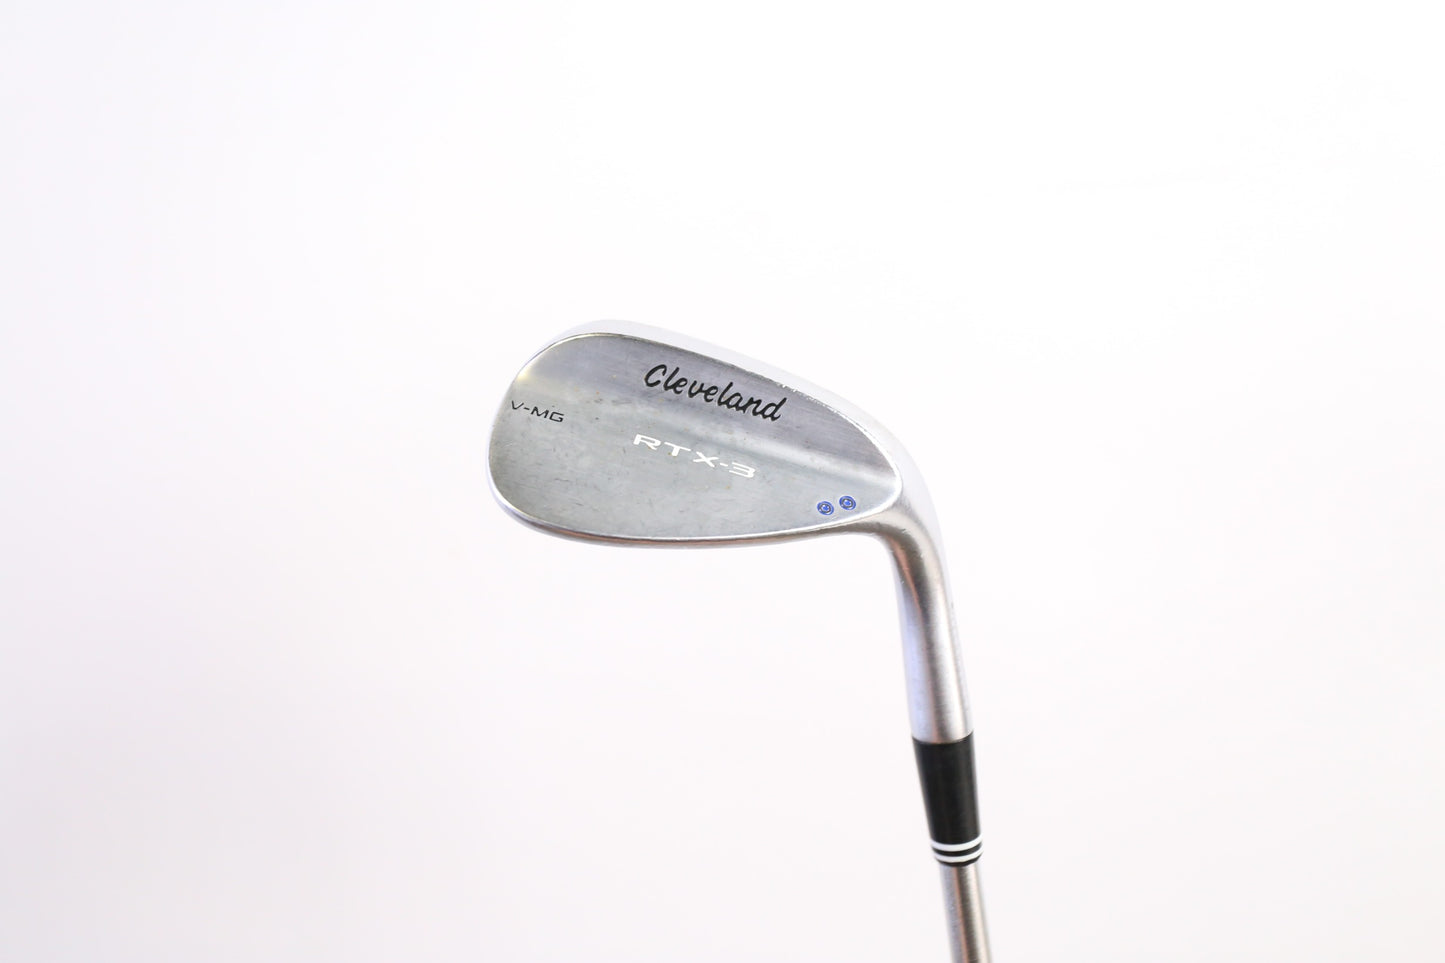 Used Cleveland RTX-3 Tour Satin Lob Wedge - Right-Handed - 58 Degrees - Stiff Flex